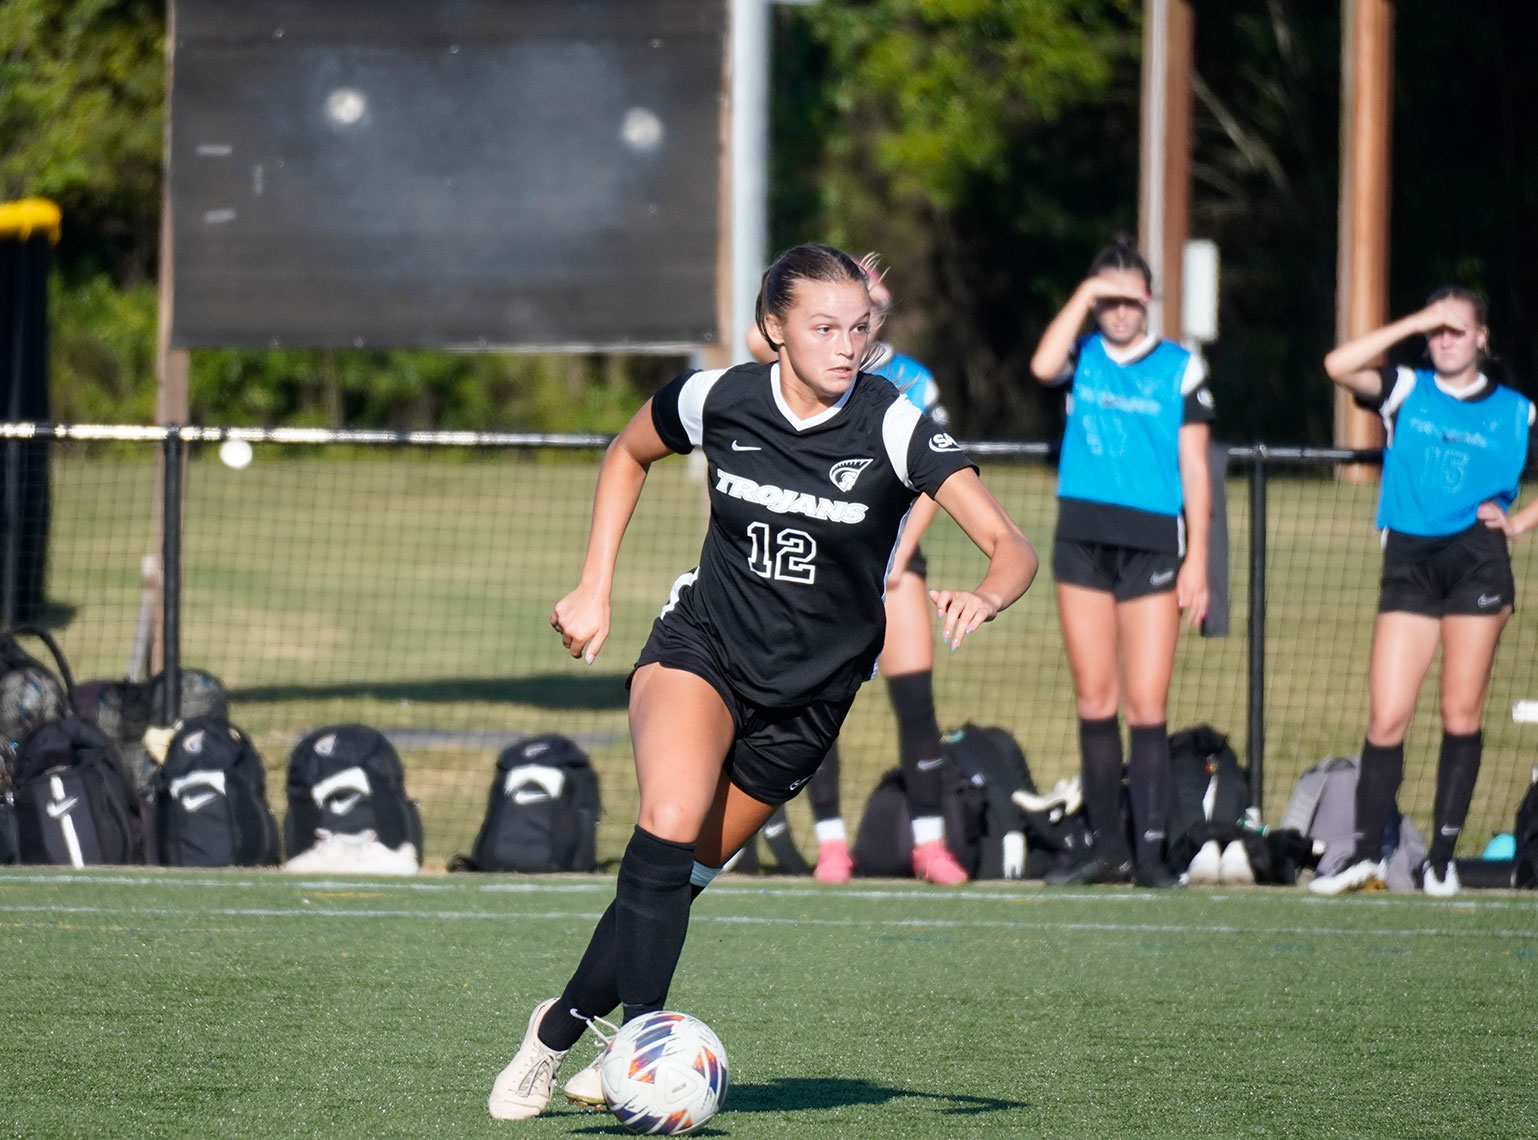 Trojans End Regular Season Play With Road Victory At Newberry; 3-1